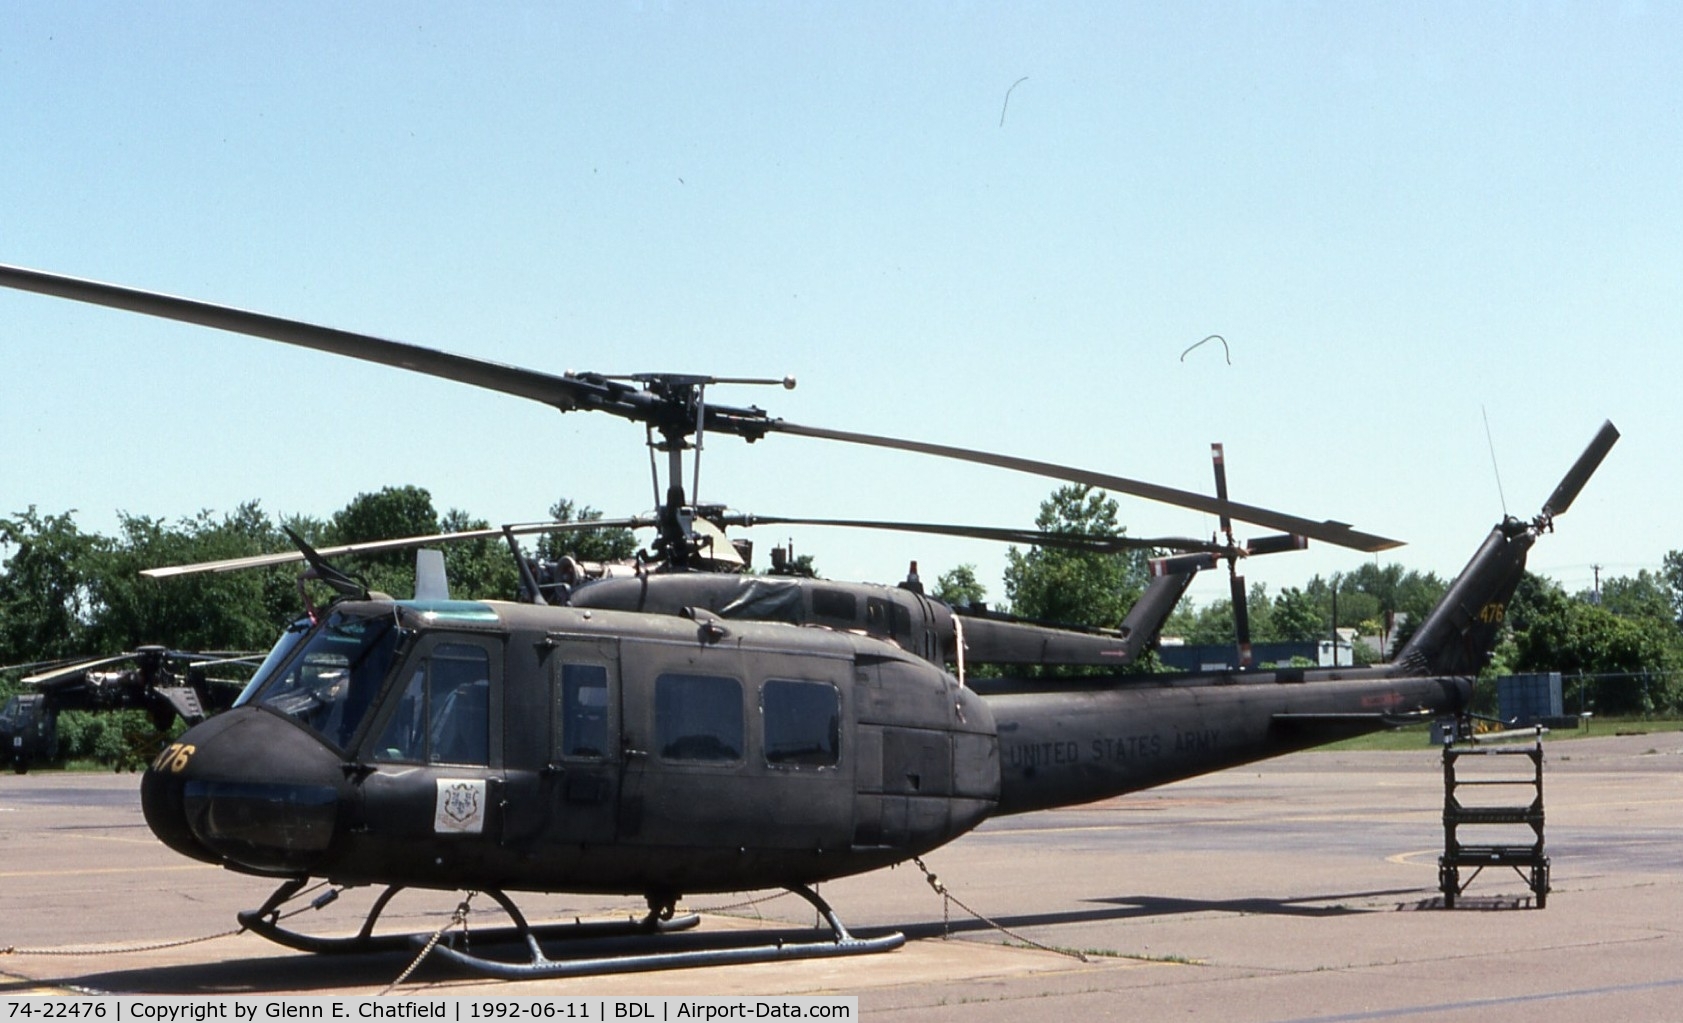 74-22476, 1974 Bell UH-1H Iroquois C/N 13800, UH-1H on the Army Guard ramp.  MAP delivery to Thailand in 2004